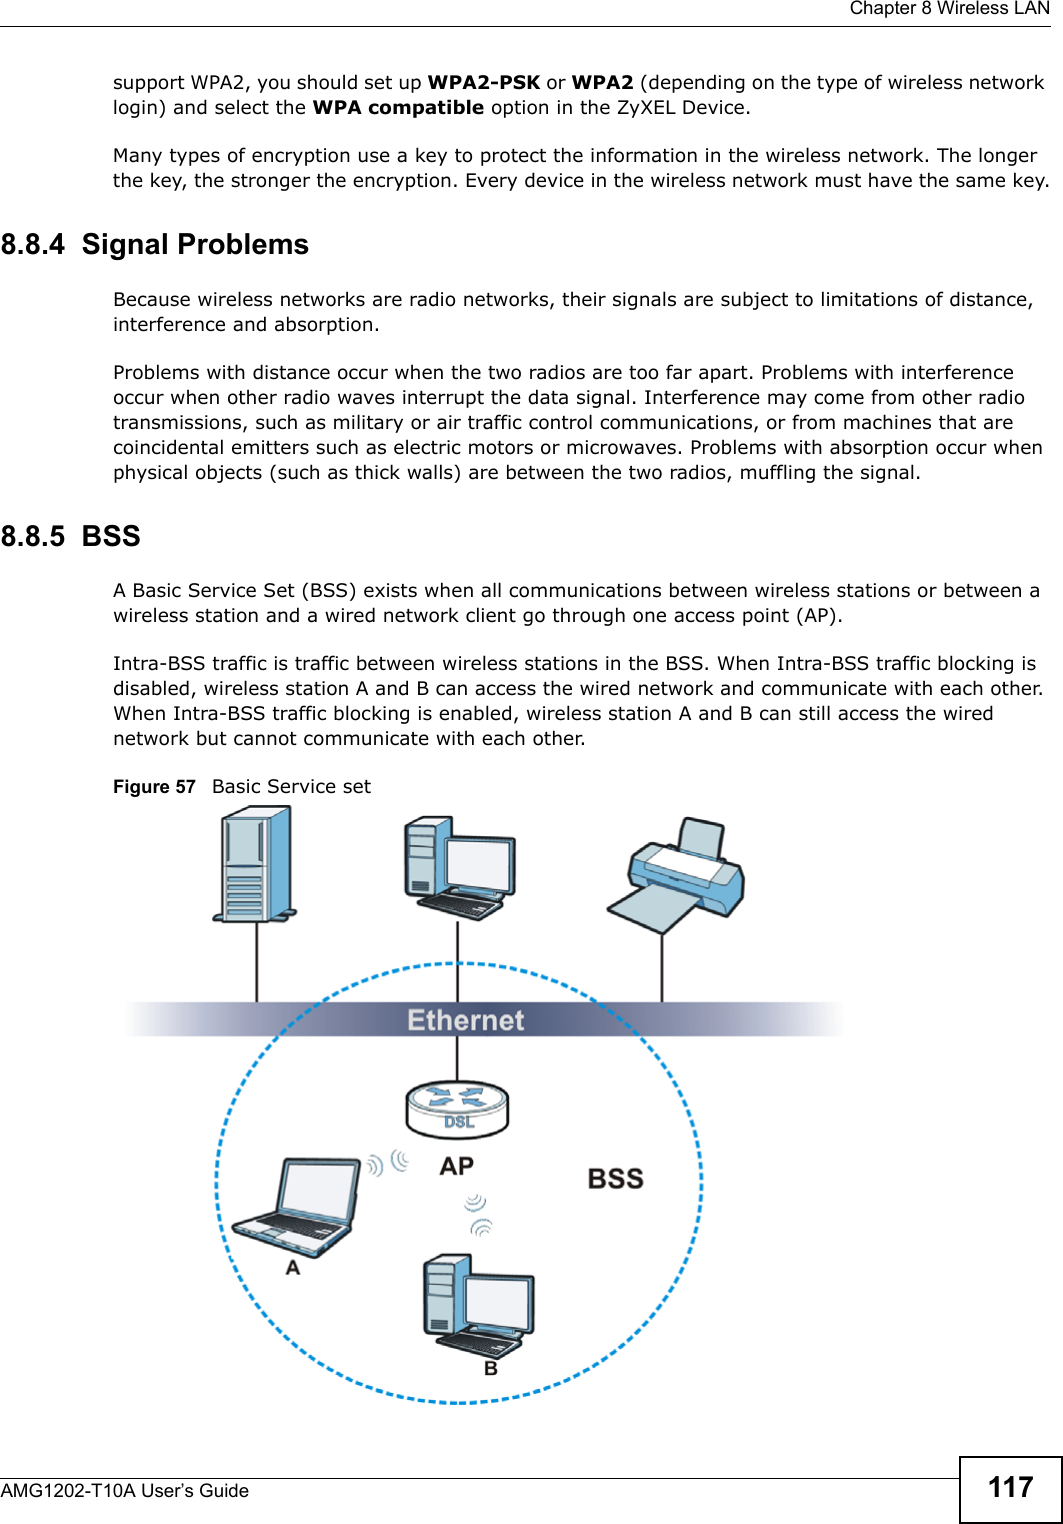  Chapter 8 Wireless LANAMG1202-T10A User’s Guide 117support WPA2, you should set up WPA2-PSK or WPA2 (depending on the type of wireless network login) and select the WPA compatible option in the ZyXEL Device.Many types of encryption use a key to protect the information in the wireless network. The longer the key, the stronger the encryption. Every device in the wireless network must have the same key.8.8.4  Signal ProblemsBecause wireless networks are radio networks, their signals are subject to limitations of distance, interference and absorption.Problems with distance occur when the two radios are too far apart. Problems with interference occur when other radio waves interrupt the data signal. Interference may come from other radio transmissions, such as military or air traffic control communications, or from machines that are coincidental emitters such as electric motors or microwaves. Problems with absorption occur when physical objects (such as thick walls) are between the two radios, muffling the signal.8.8.5  BSSA Basic Service Set (BSS) exists when all communications between wireless stations or between a wireless station and a wired network client go through one access point (AP). Intra-BSS traffic is traffic between wireless stations in the BSS. When Intra-BSS traffic blocking is disabled, wireless station A and B can access the wired network and communicate with each other. When Intra-BSS traffic blocking is enabled, wireless station A and B can still access the wired network but cannot communicate with each other.Figure 57   Basic Service set